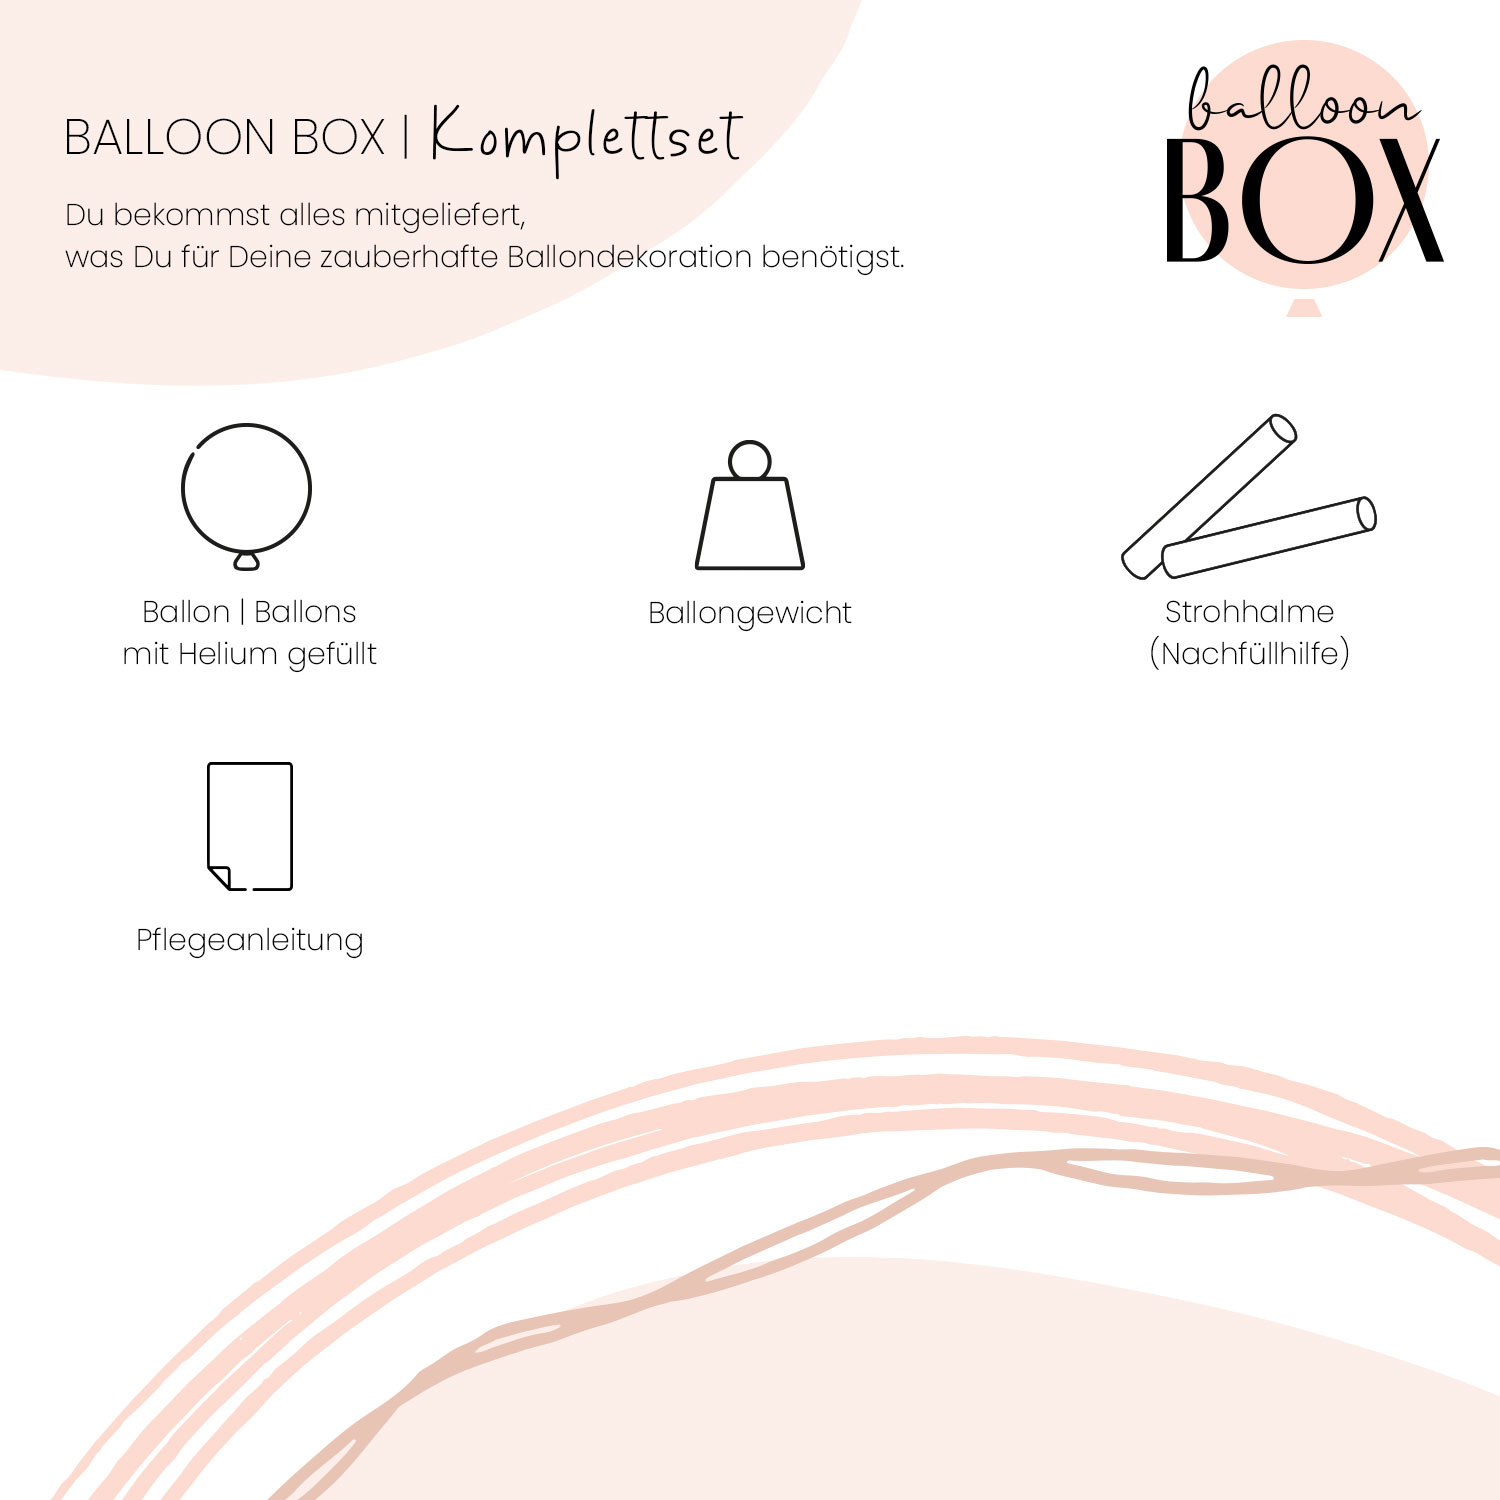 Fotoballon in a Box - With All My Heart